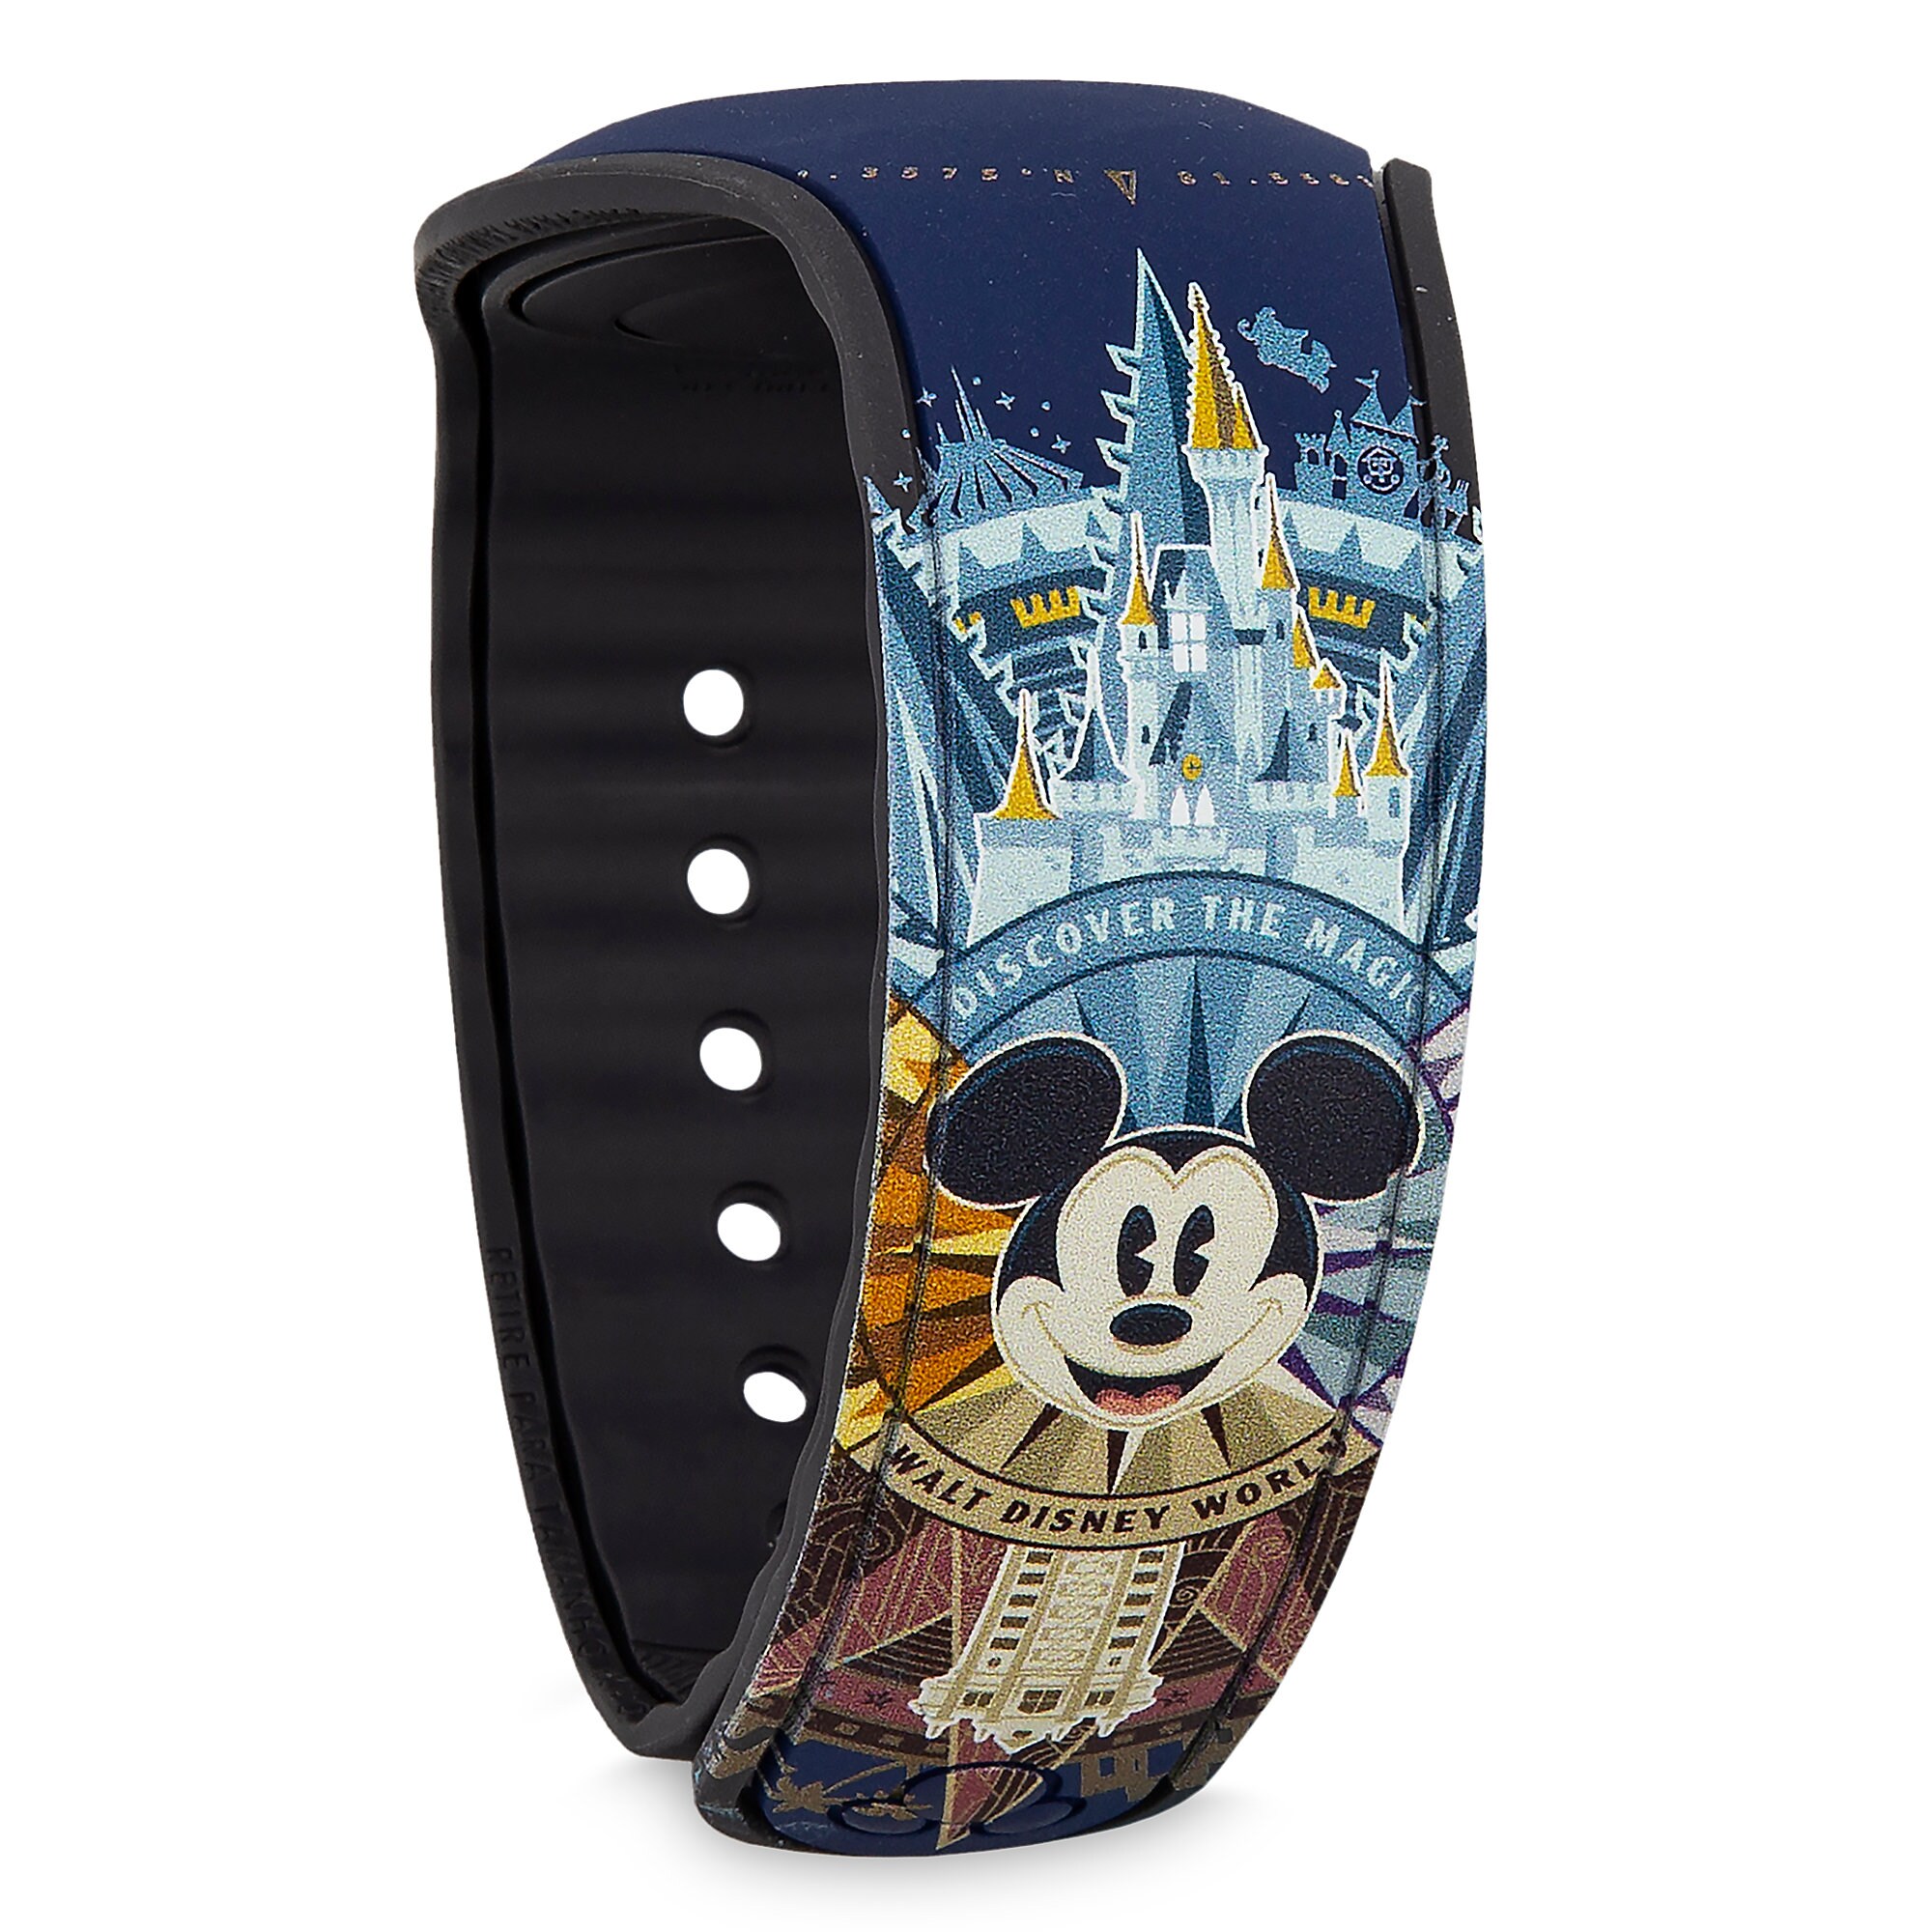 Walt Disney World Passport Collection MagicBand 2 by Dooney & Bourke - Limited Release